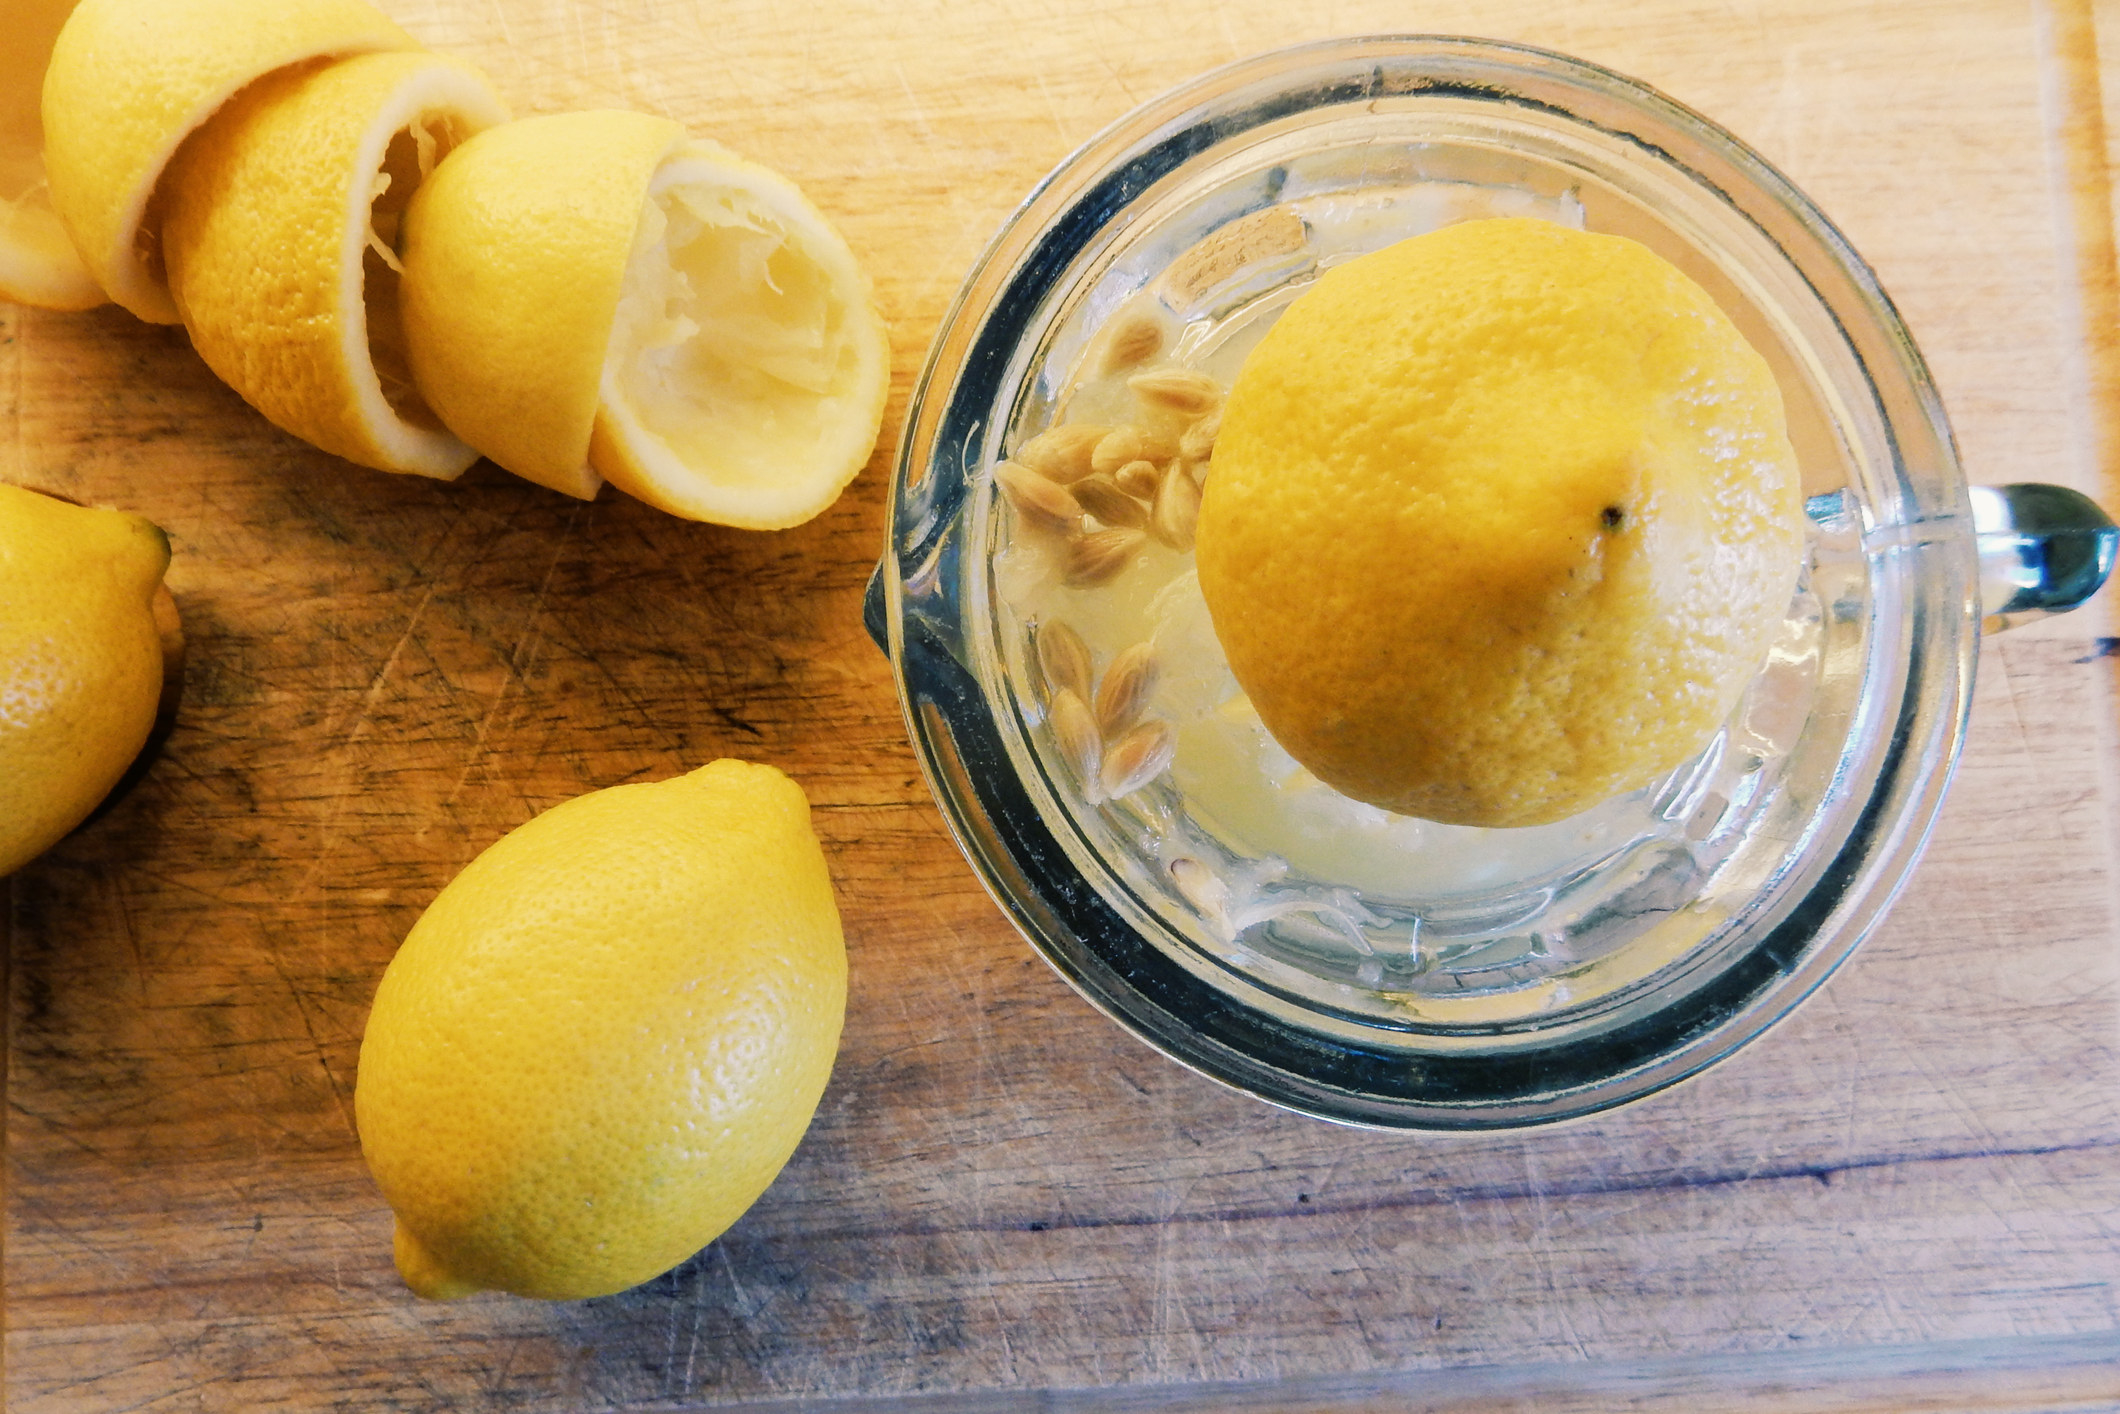 Squeezing lemons for juice.